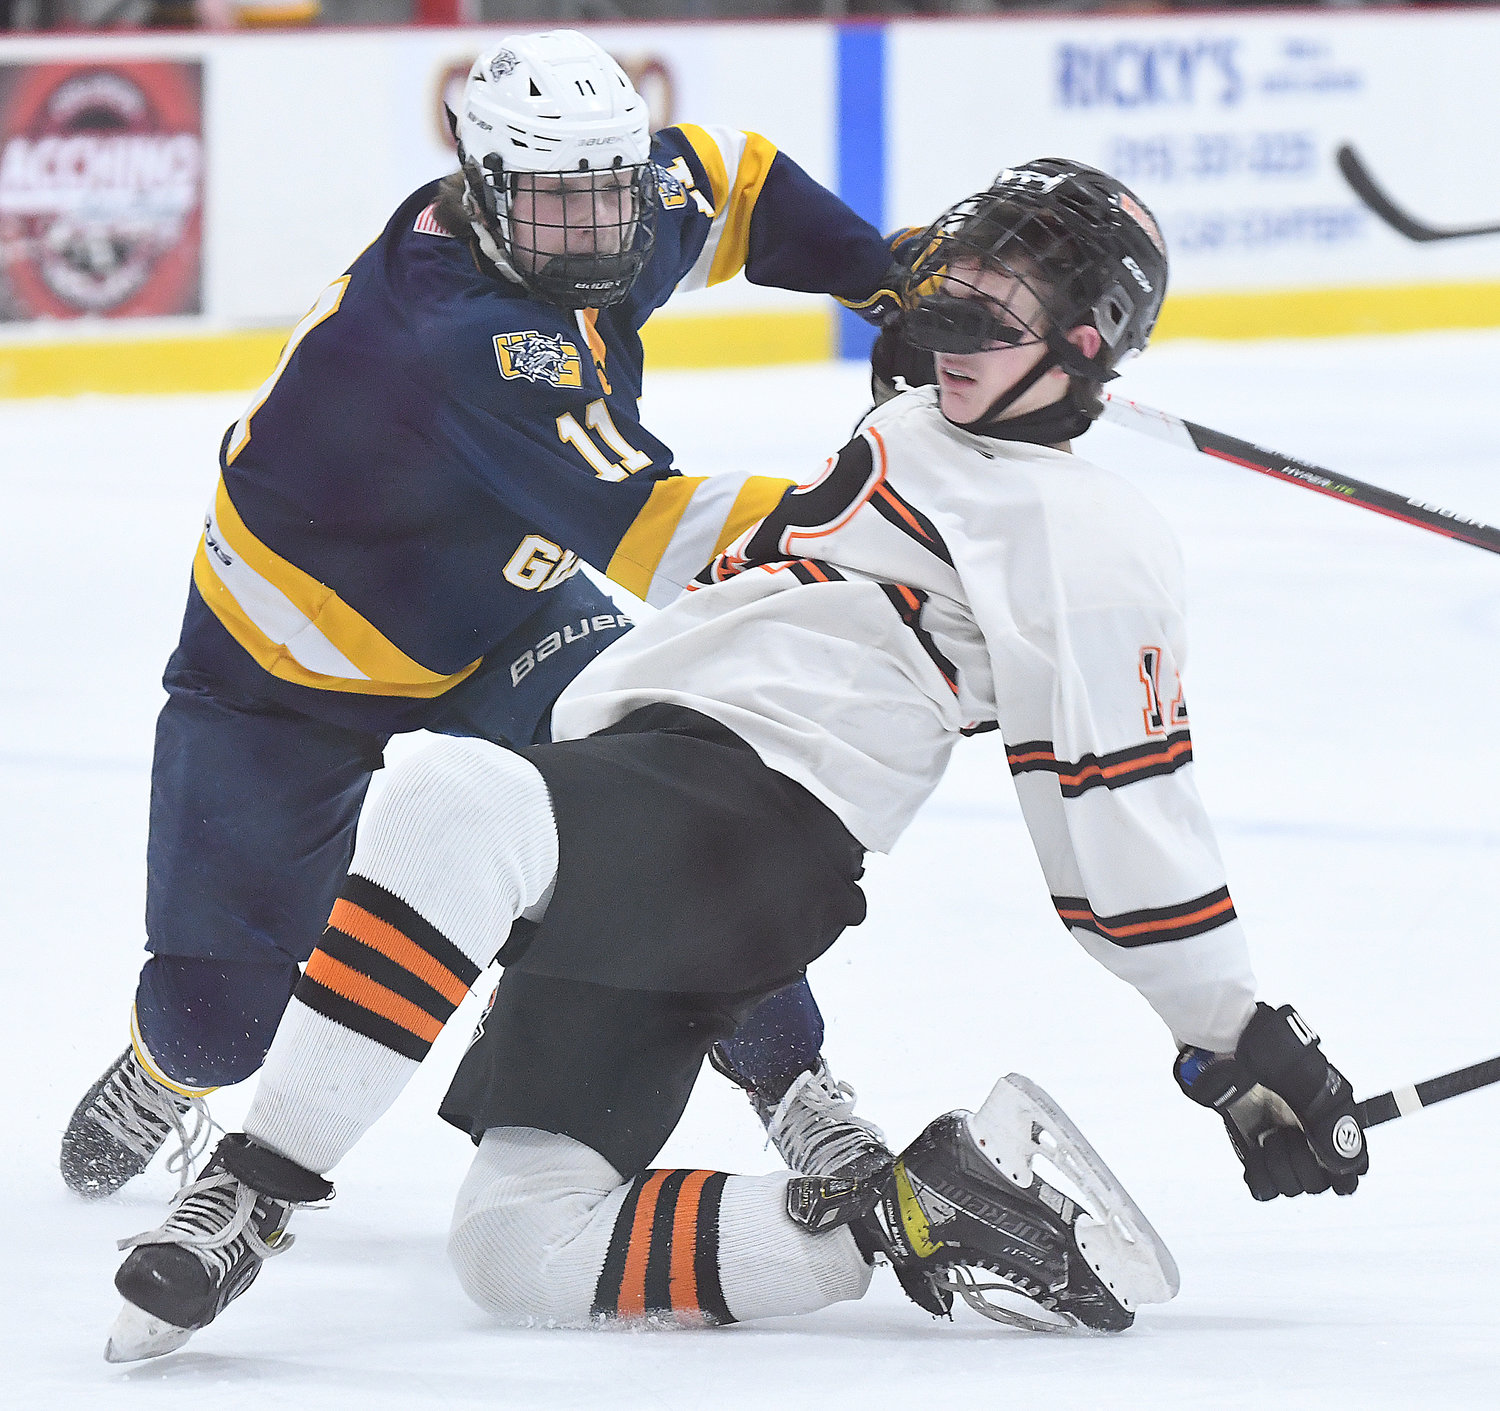 Rome Free Academy forward John Sharrino, right, collides with West Genesee's William Schneid during the first period at Kennedy Arena Tuesday night. Schneid had two goals in the Wildcats' 10-1 win.